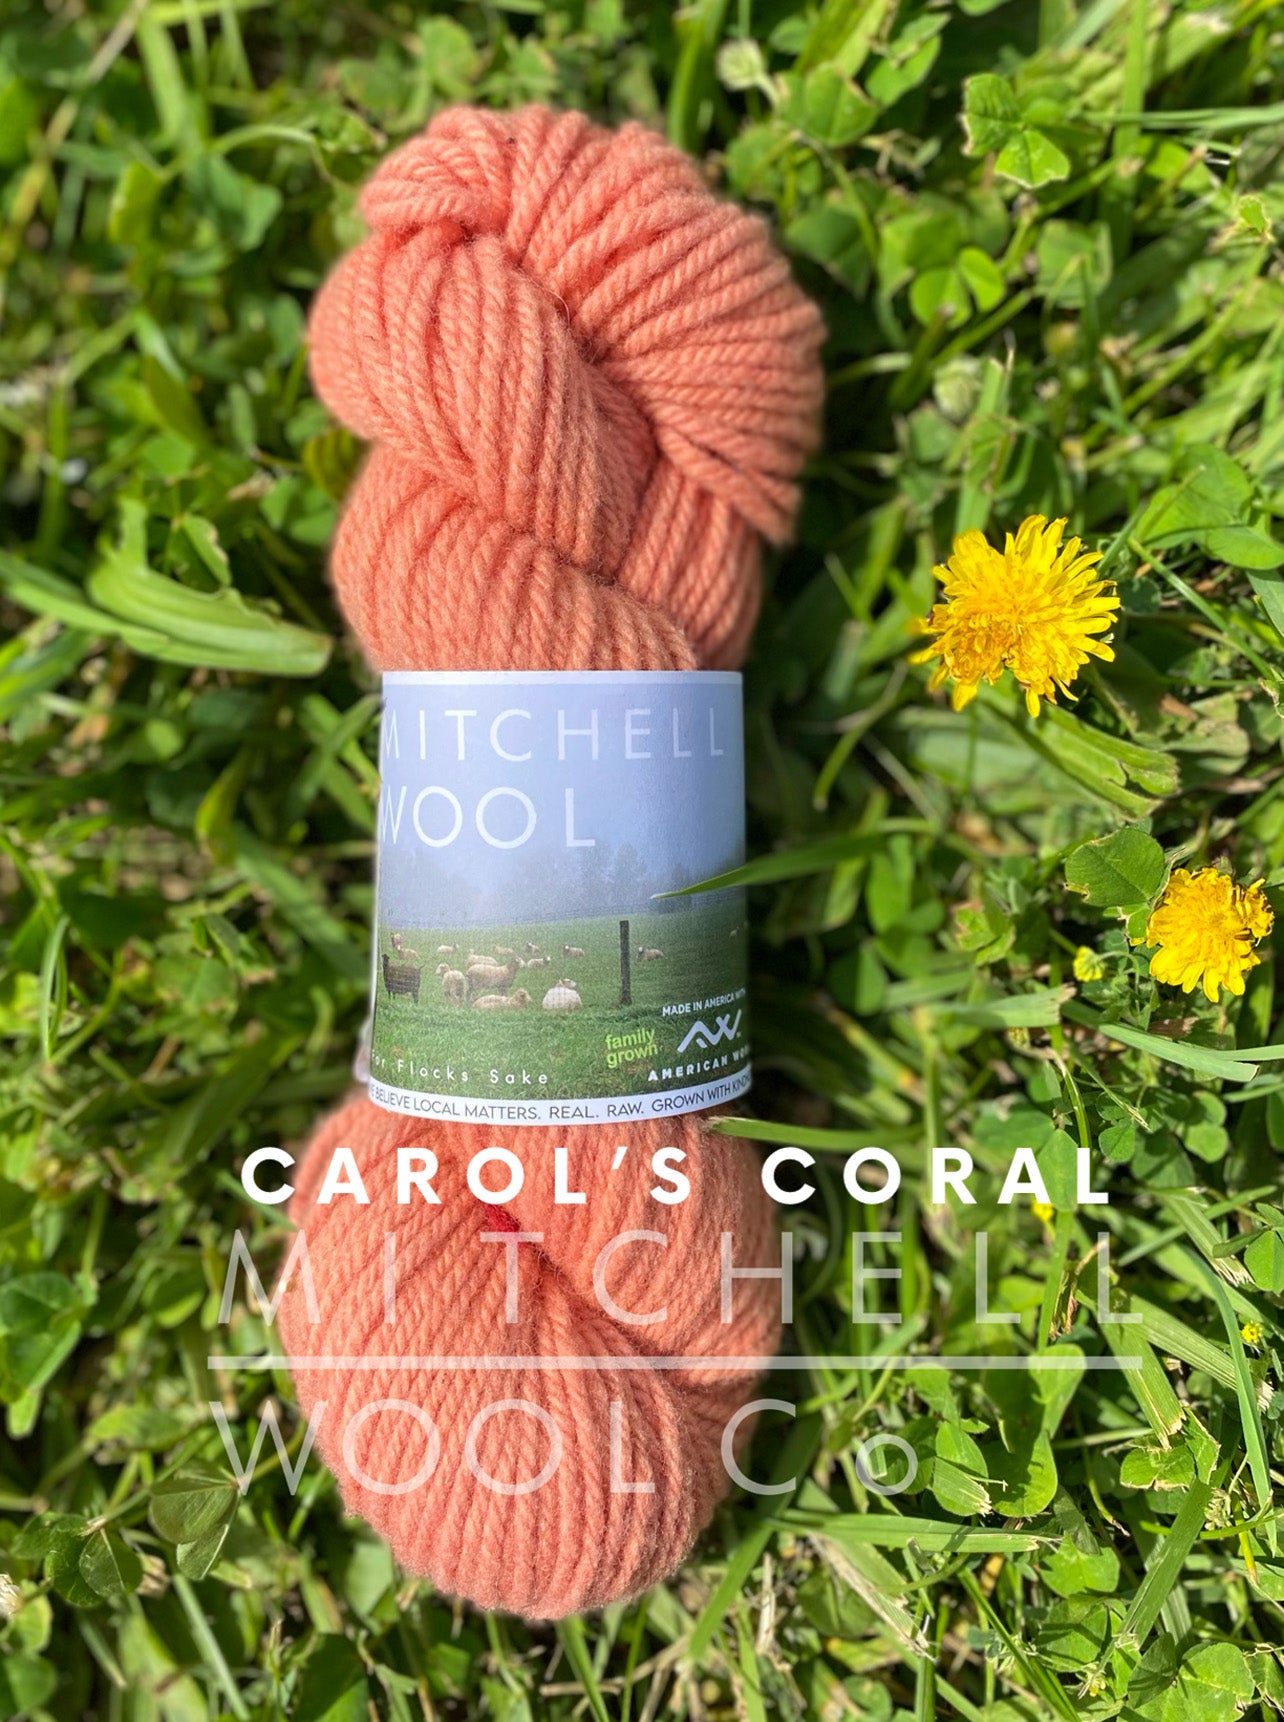 Cormo worsted